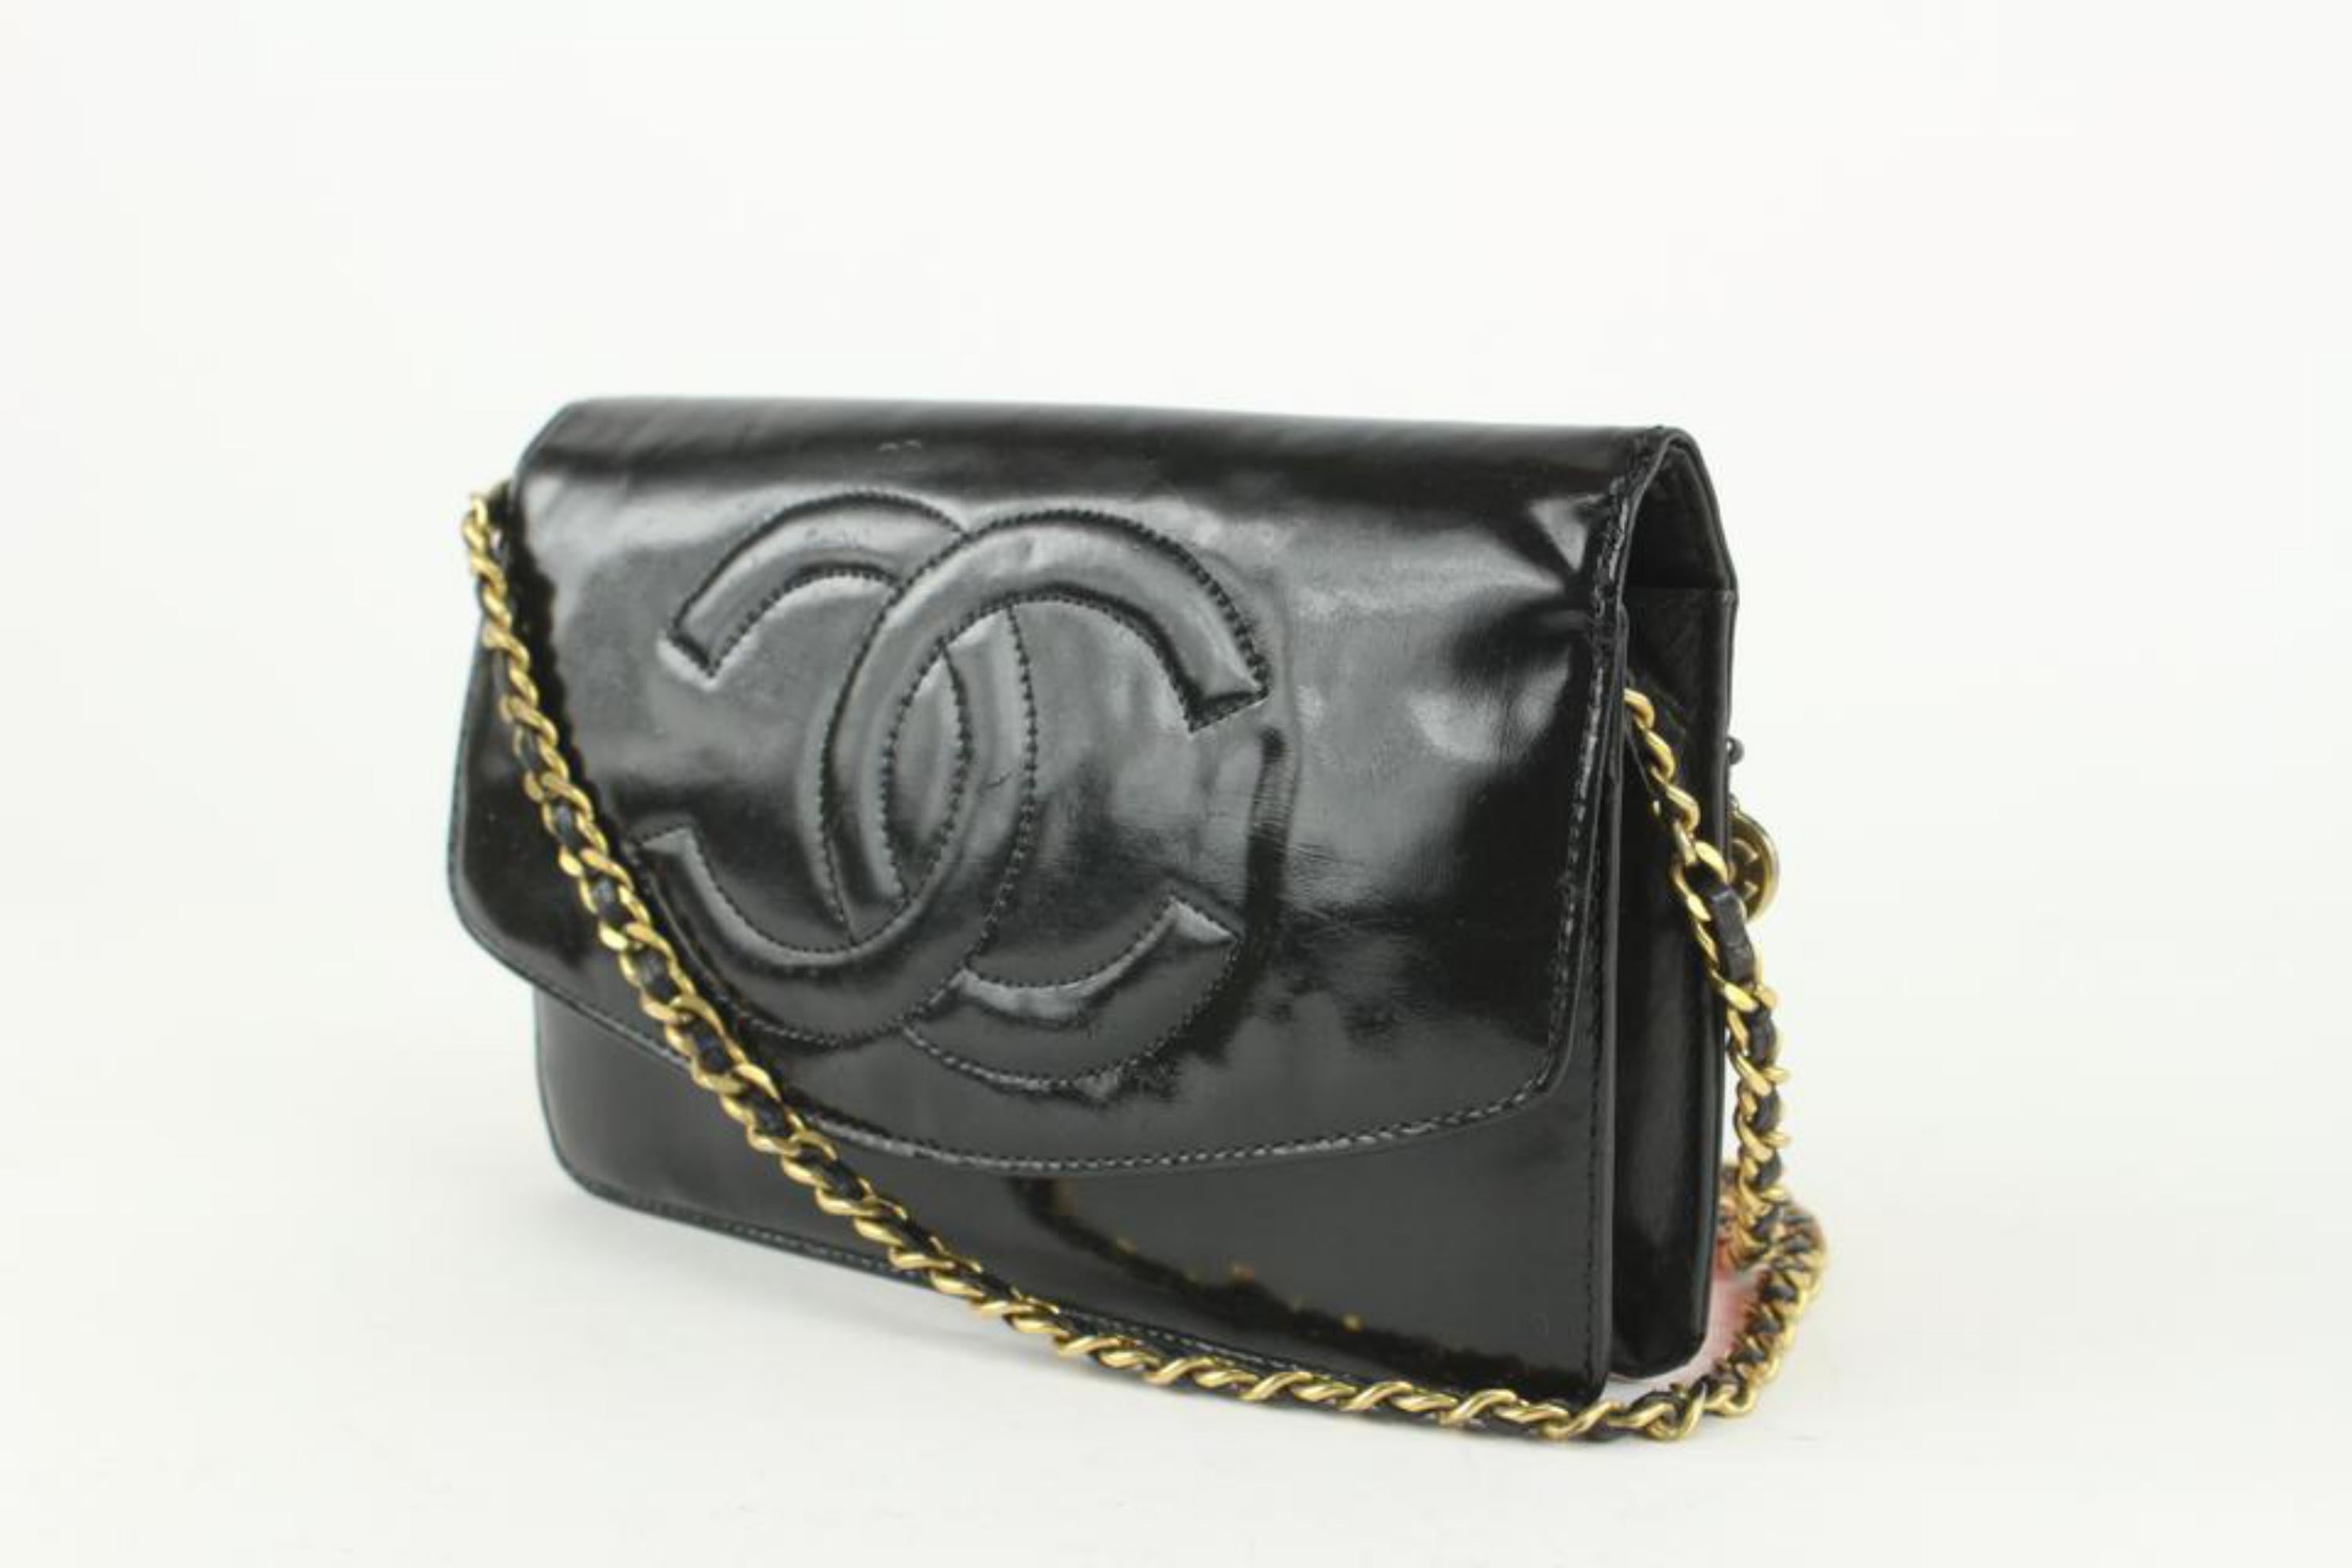 Chanel Vintage Black Patent Leather Timeless Wallet on Chain WOC Flap 1112c59 For Sale 6